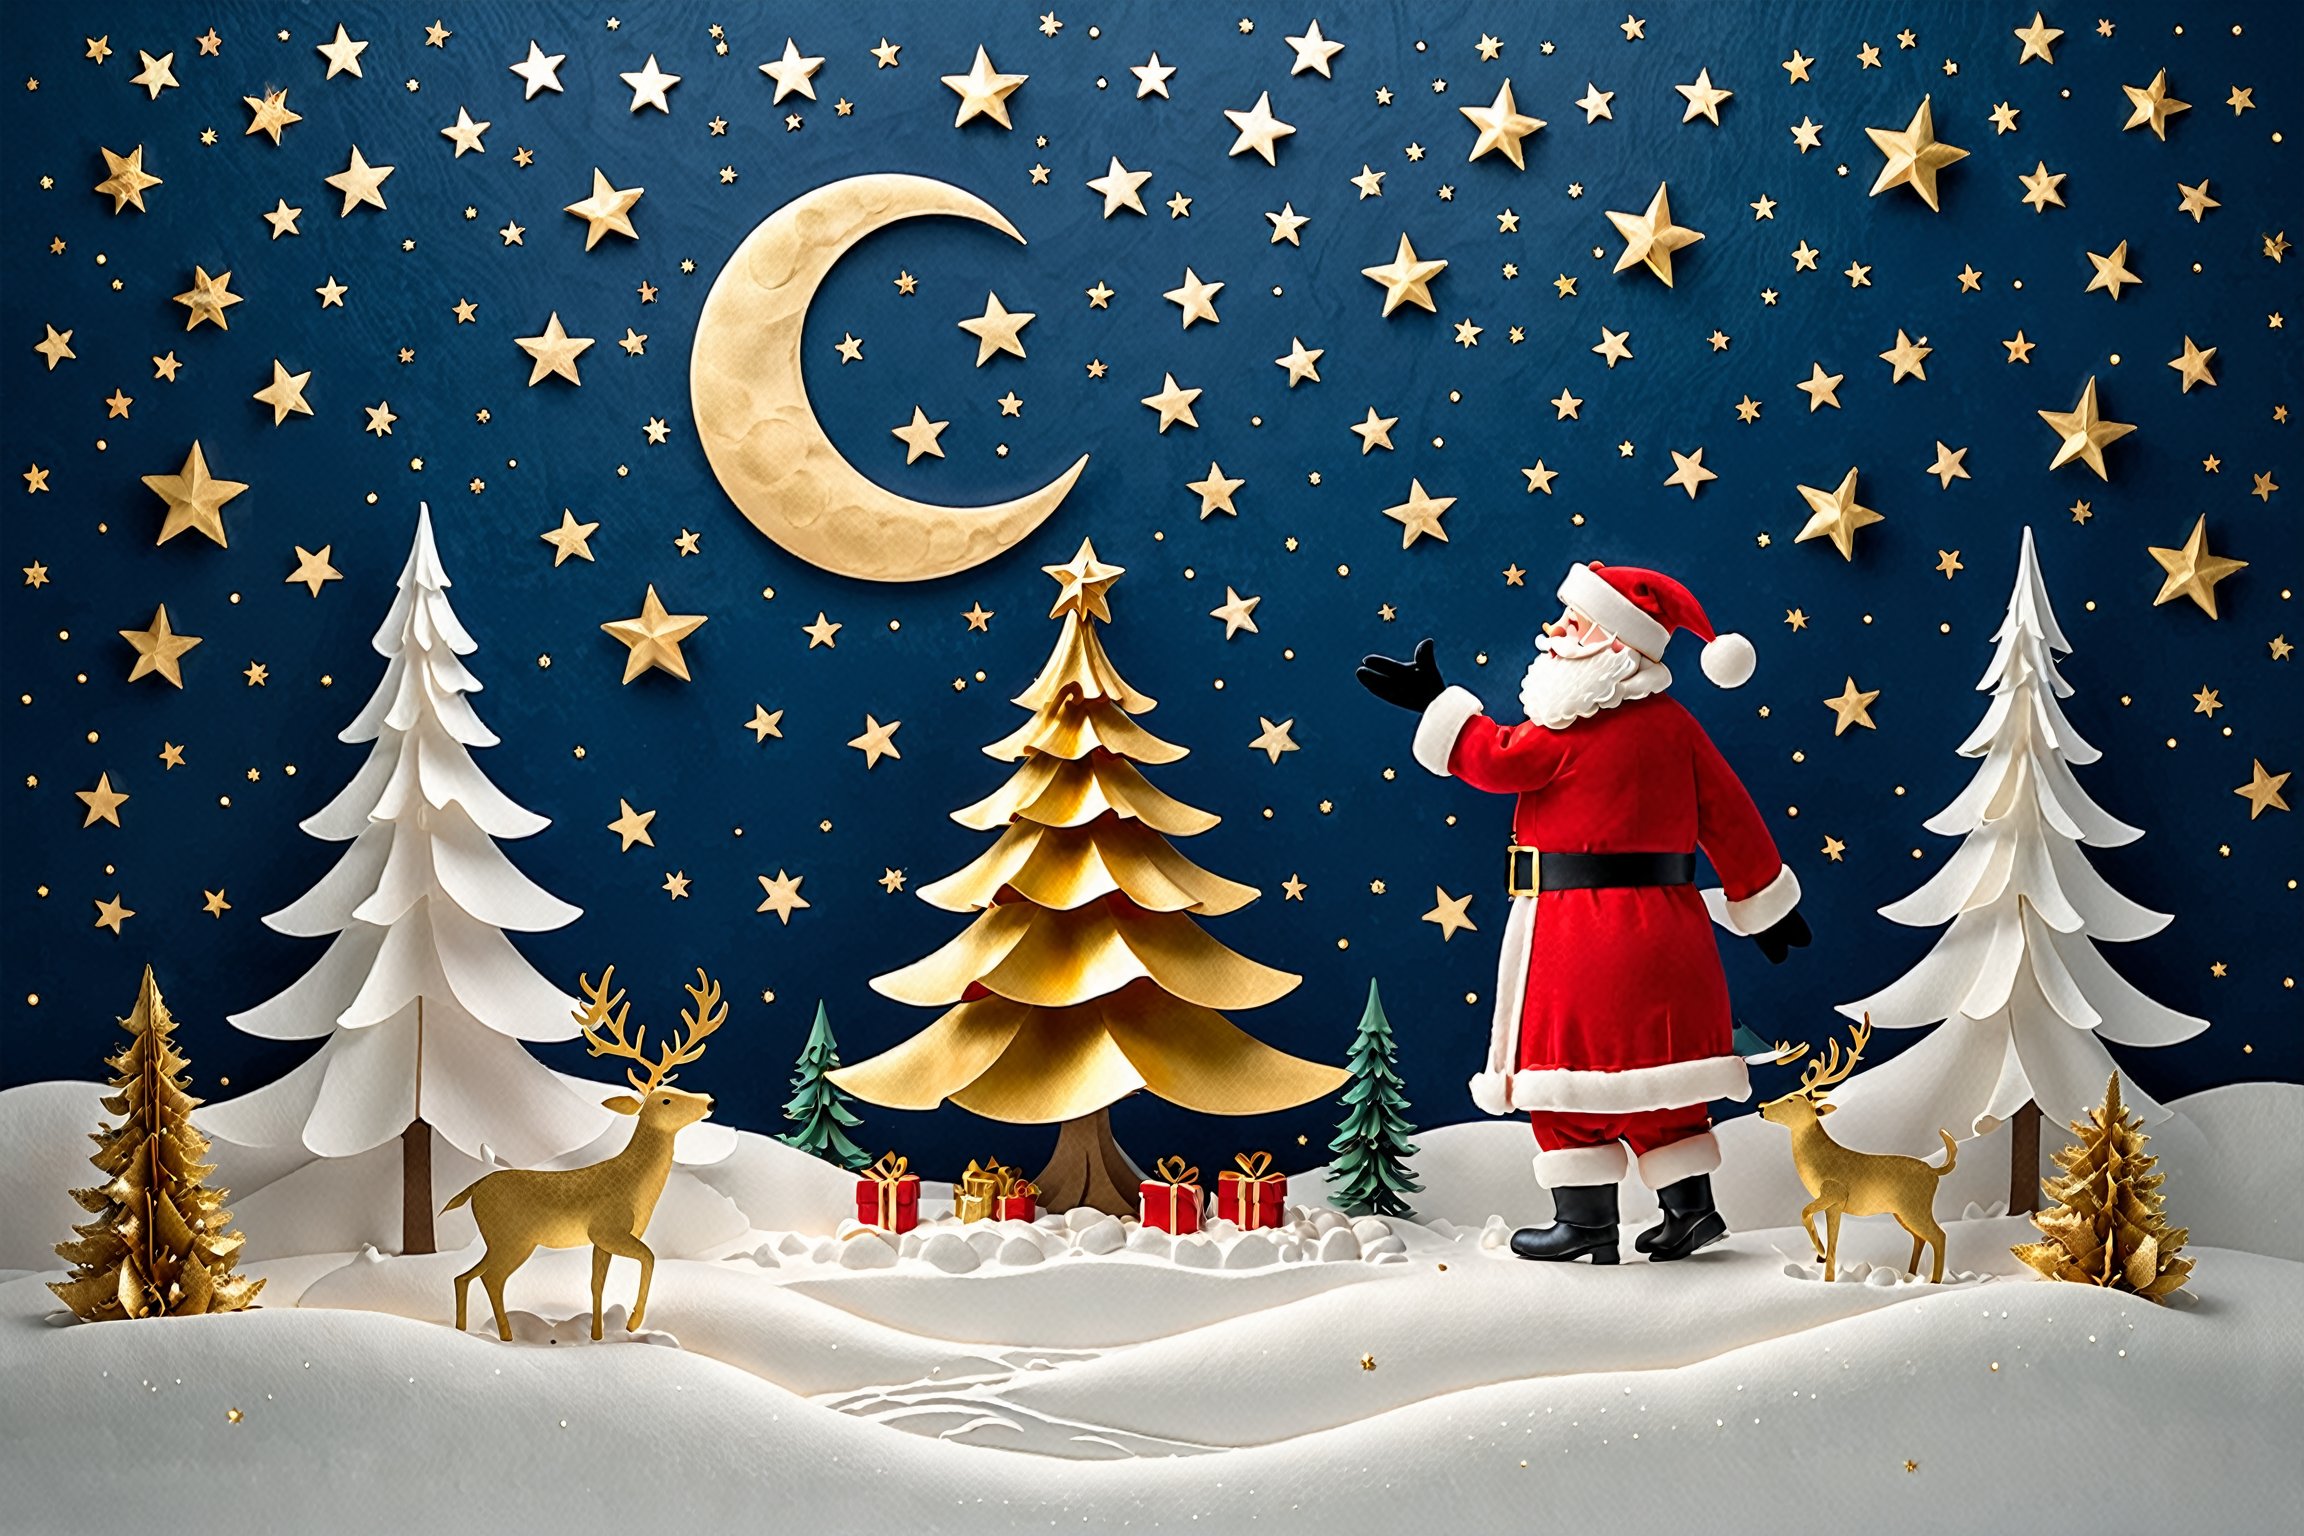 Here's your whimsical nighttime scene:

A dreamy winter wonderland unfolds against a velvety deep blue backdrop, where a luminous crescent moon, studded with twinkling stars, takes center stage amidst puffy clouds of varying sizes. Santa Claus, resplendent in his iconic red suit, hovers mid-air, outstretched hand poised to bestow a star upon a majestic golden Christmas tree standing tall on a snowy clearing. The tree's delicate branches sway gently, as two identical companions stand sentinel at the image's base. Soft, ambient lighting bathes the entire scene in an ethereal glow, conjuring a sense of enchantment and wonder. Papercraft details abound, with intricate cutouts and layered textures adding depth and visual interest to this captivating nighttime tableau.